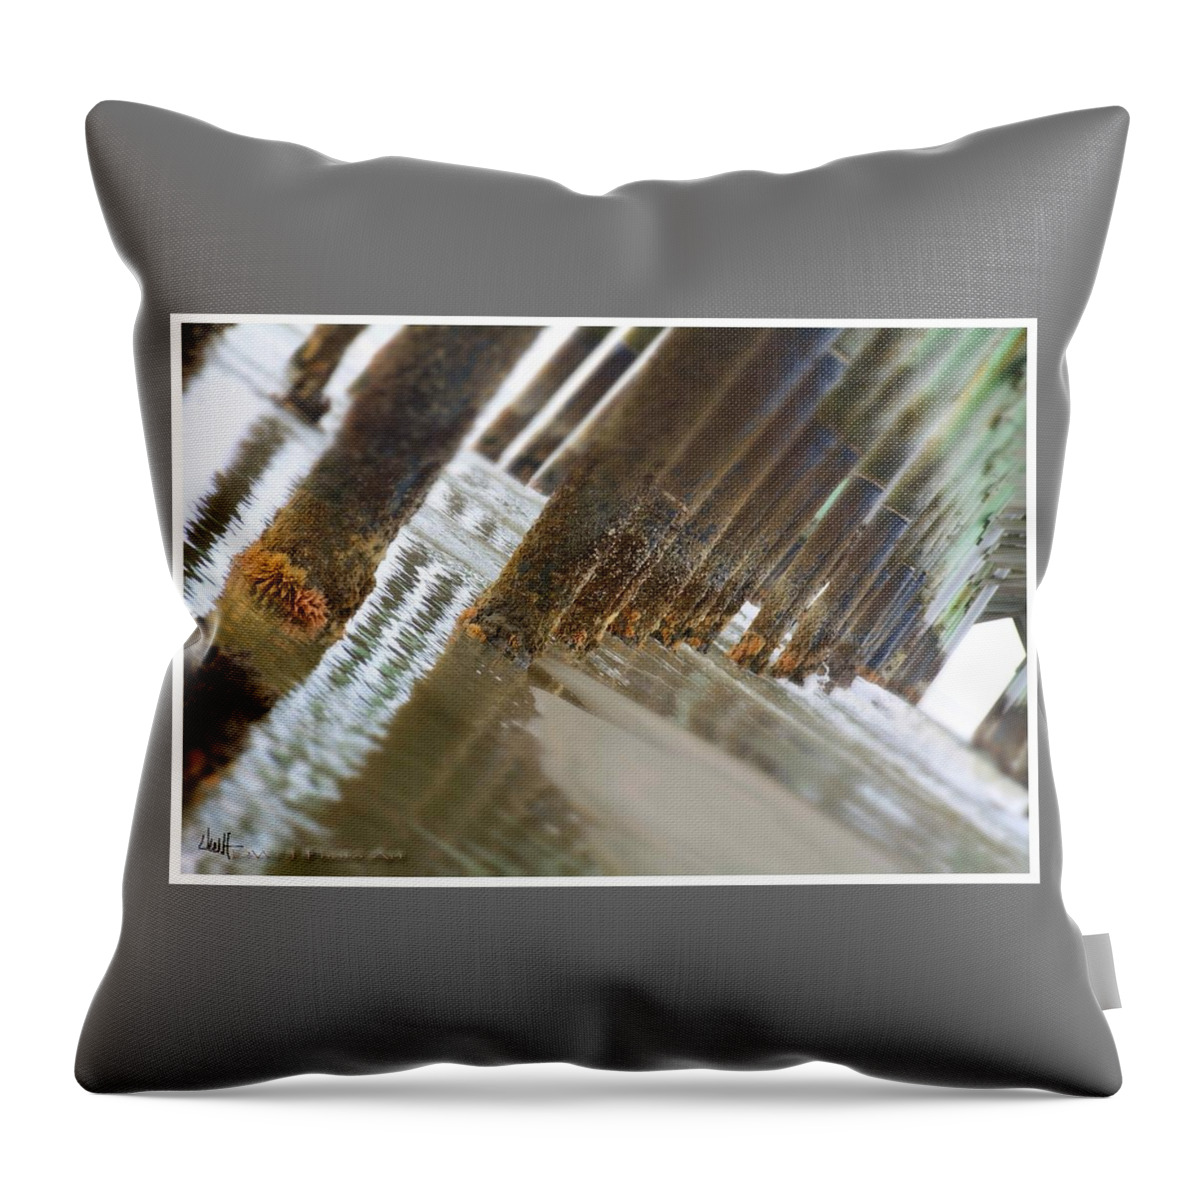 Waterscape Throw Pillow featuring the photograph The Pier by David Healey